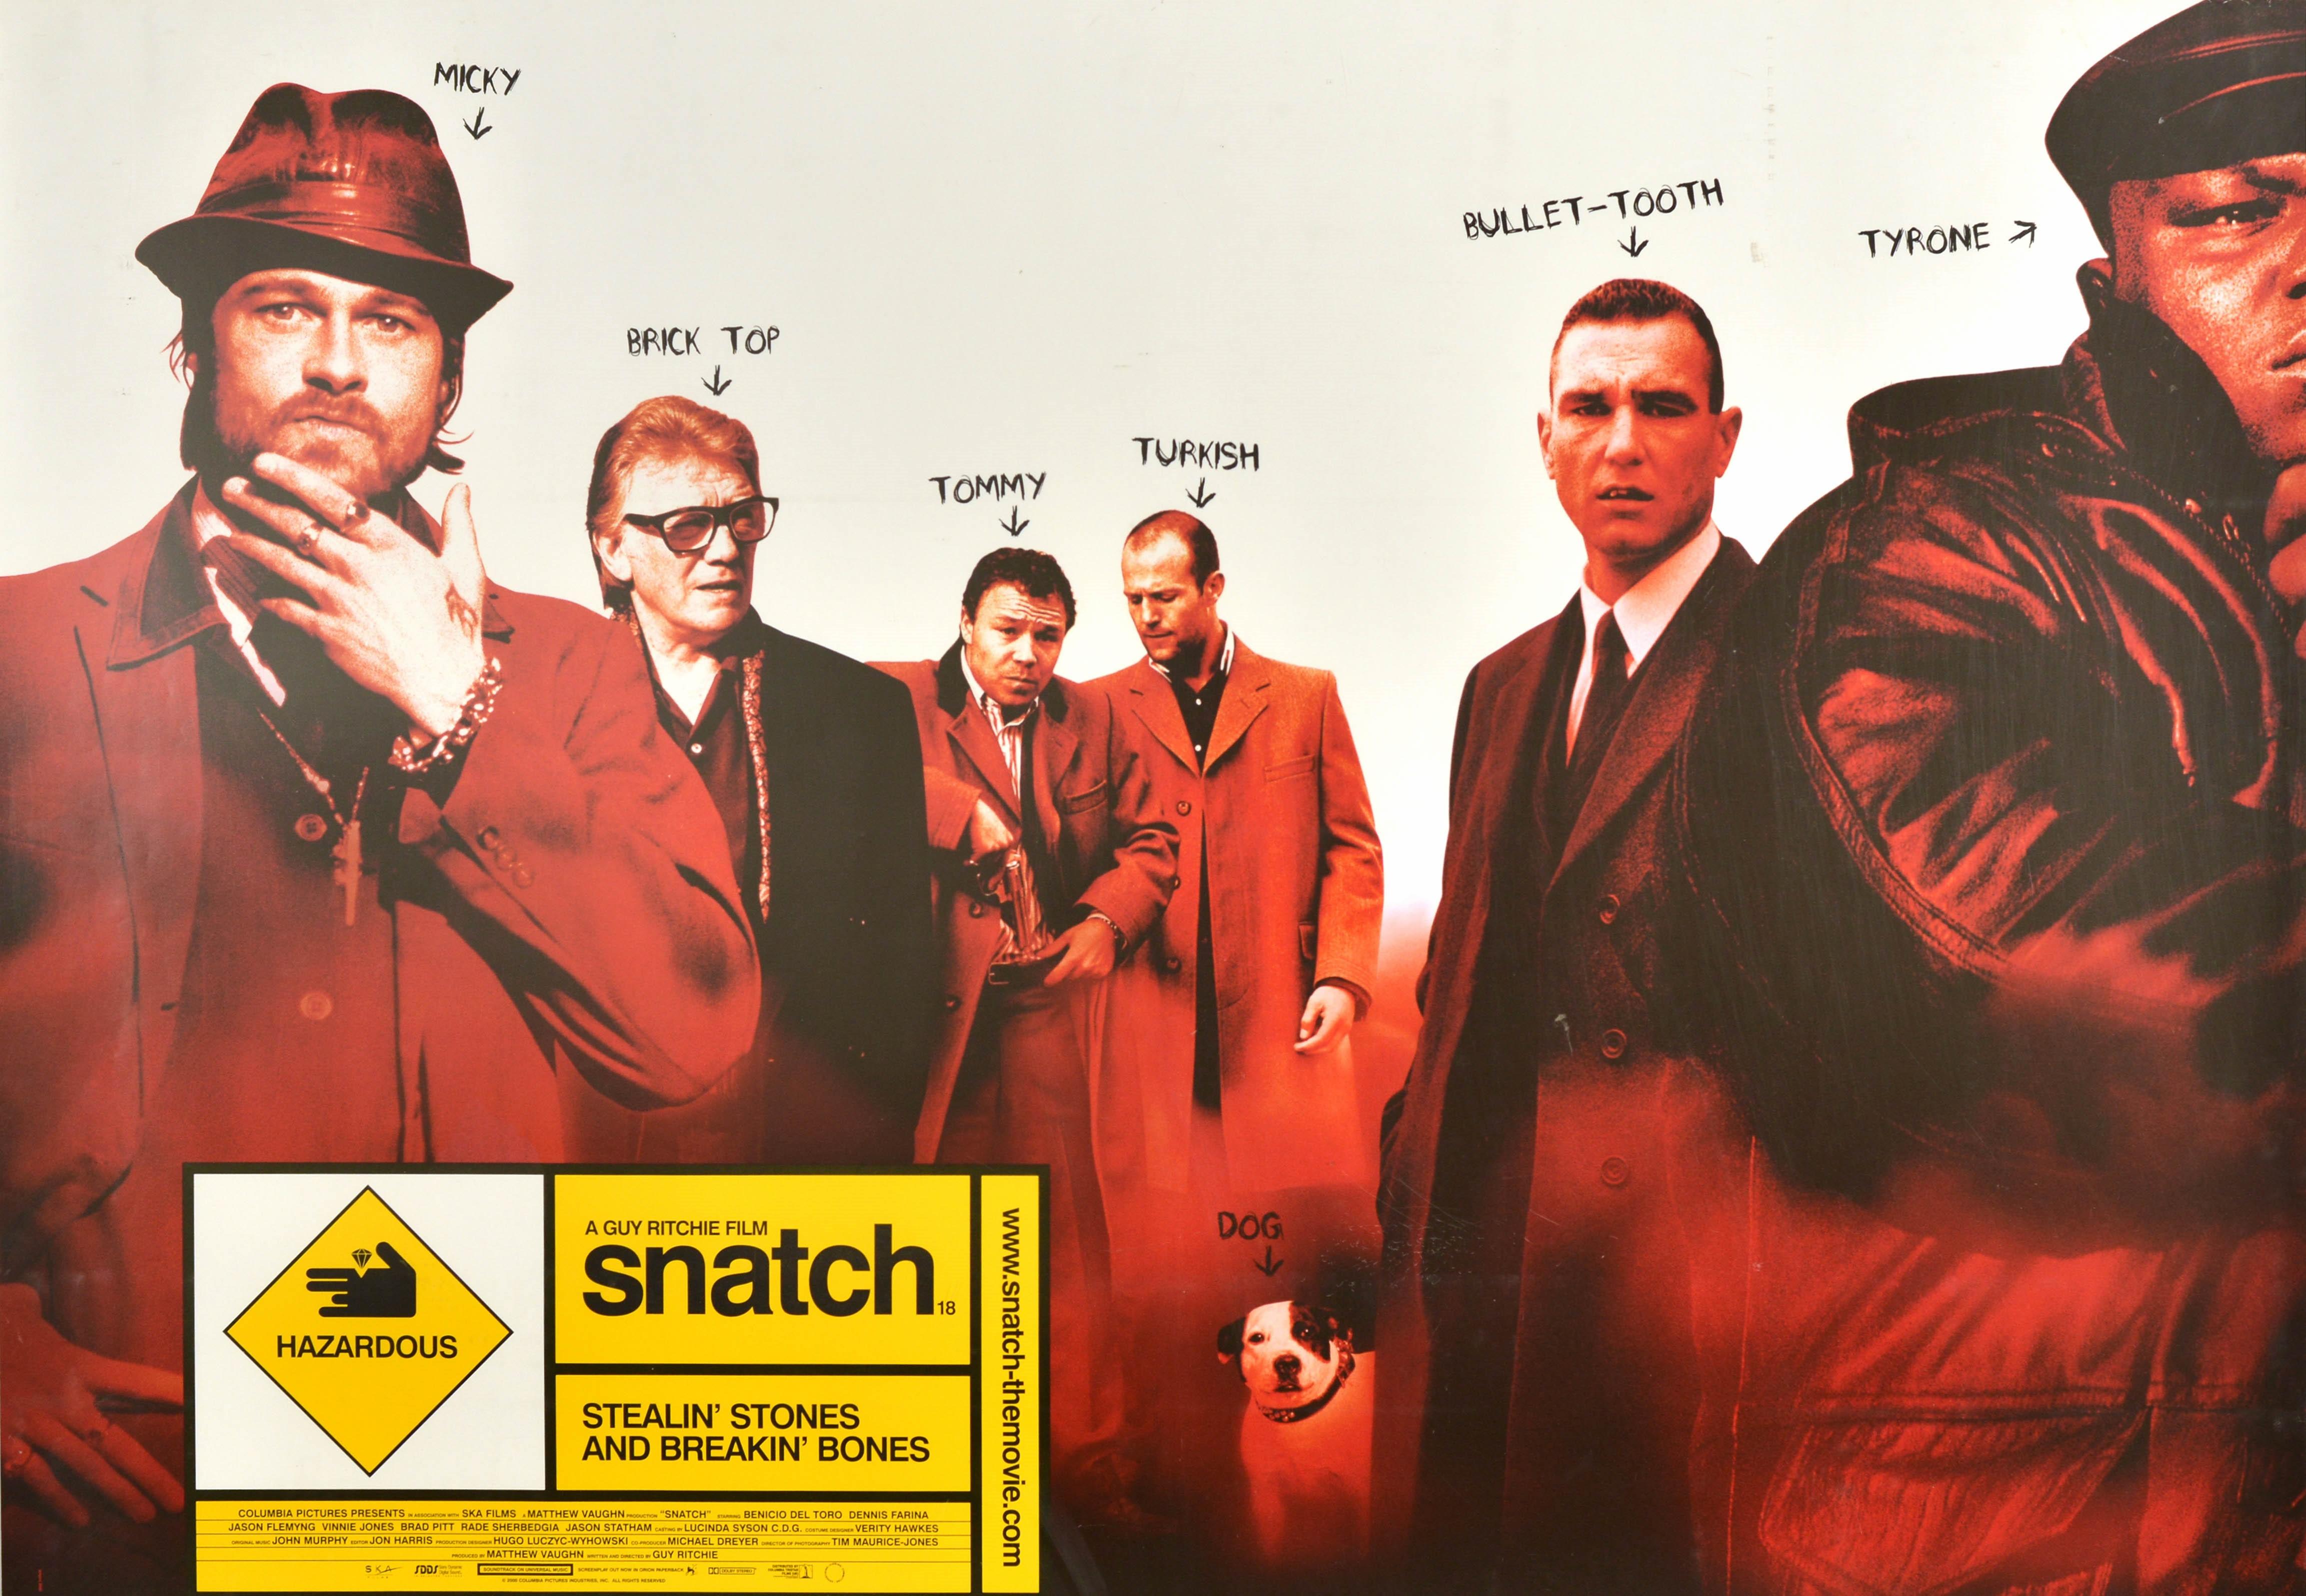 Original vintage movie poster for a British crime comedy film Snatch about a stolen diamond, small-time boxing promoter and a ruthless gangster set in the London criminal underworld, written and directed by Guy Ritchie featuring photos and names of